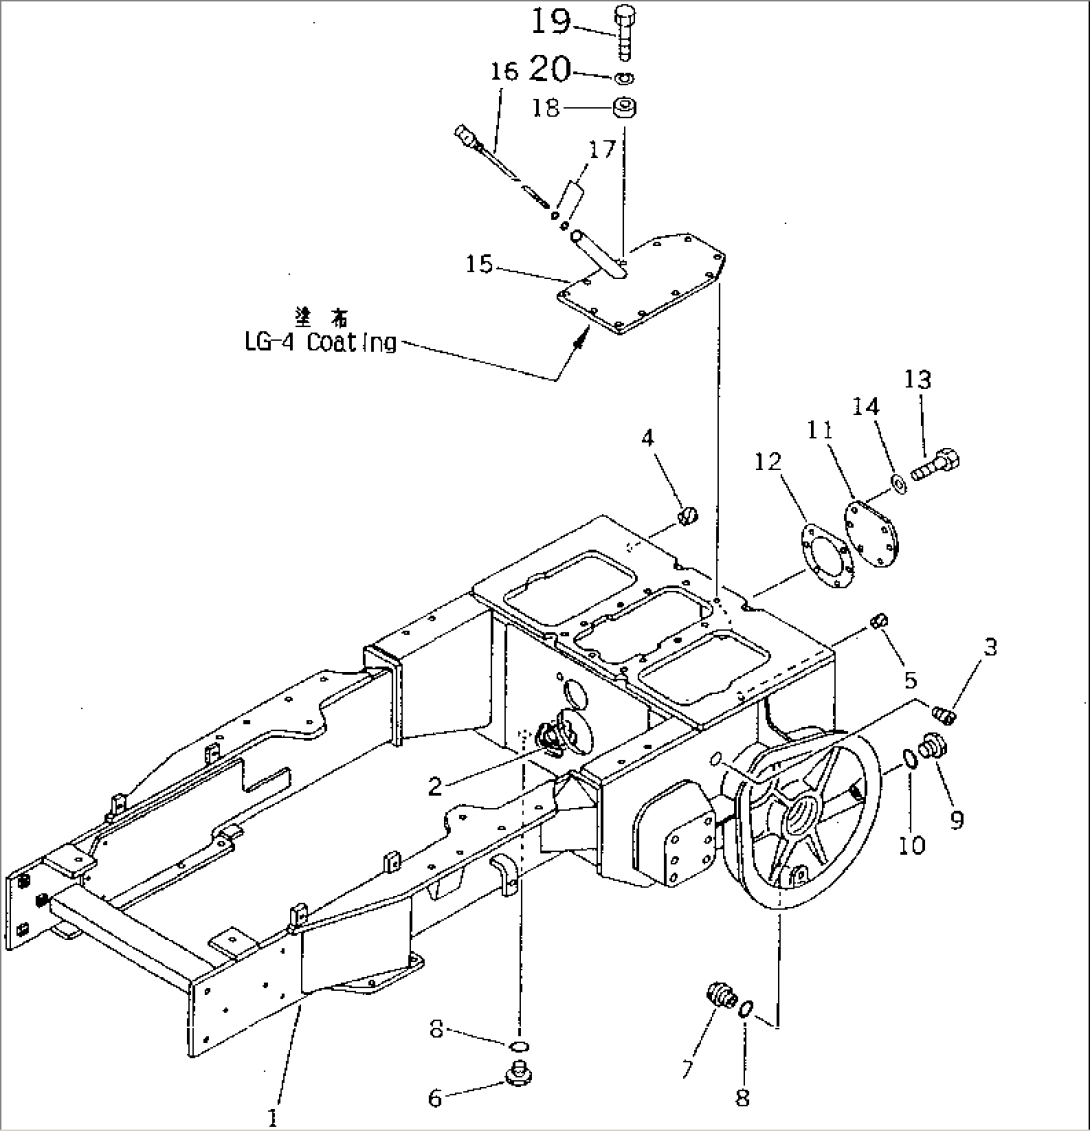 STEERING CASE AND MAIN FRAME (FOR ANGLE DOZER) (FOR TWO LEVERS STEERING)